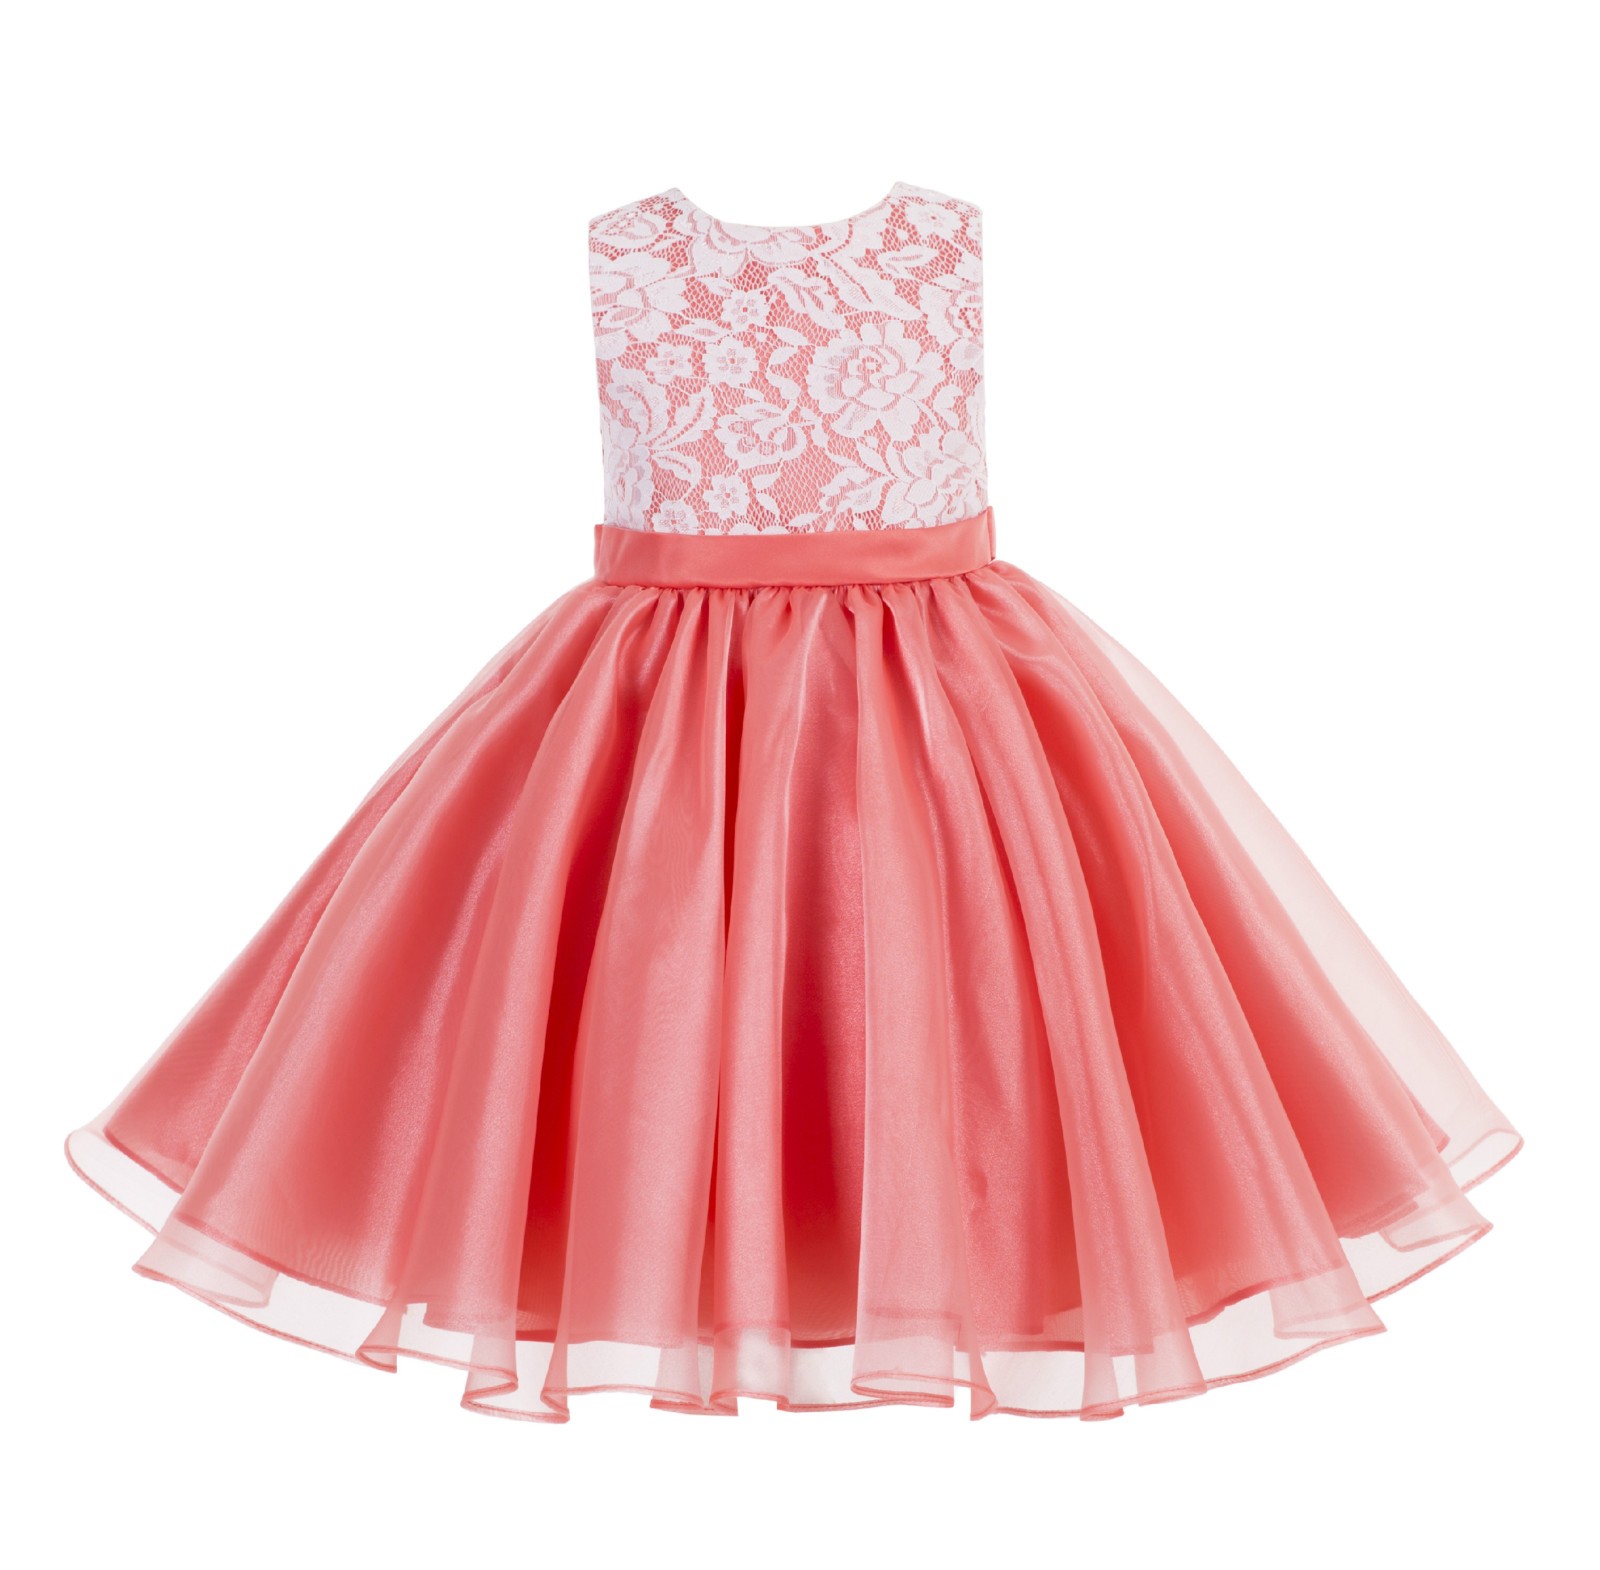 Coral Lace Organza Flower Girl Dress 186